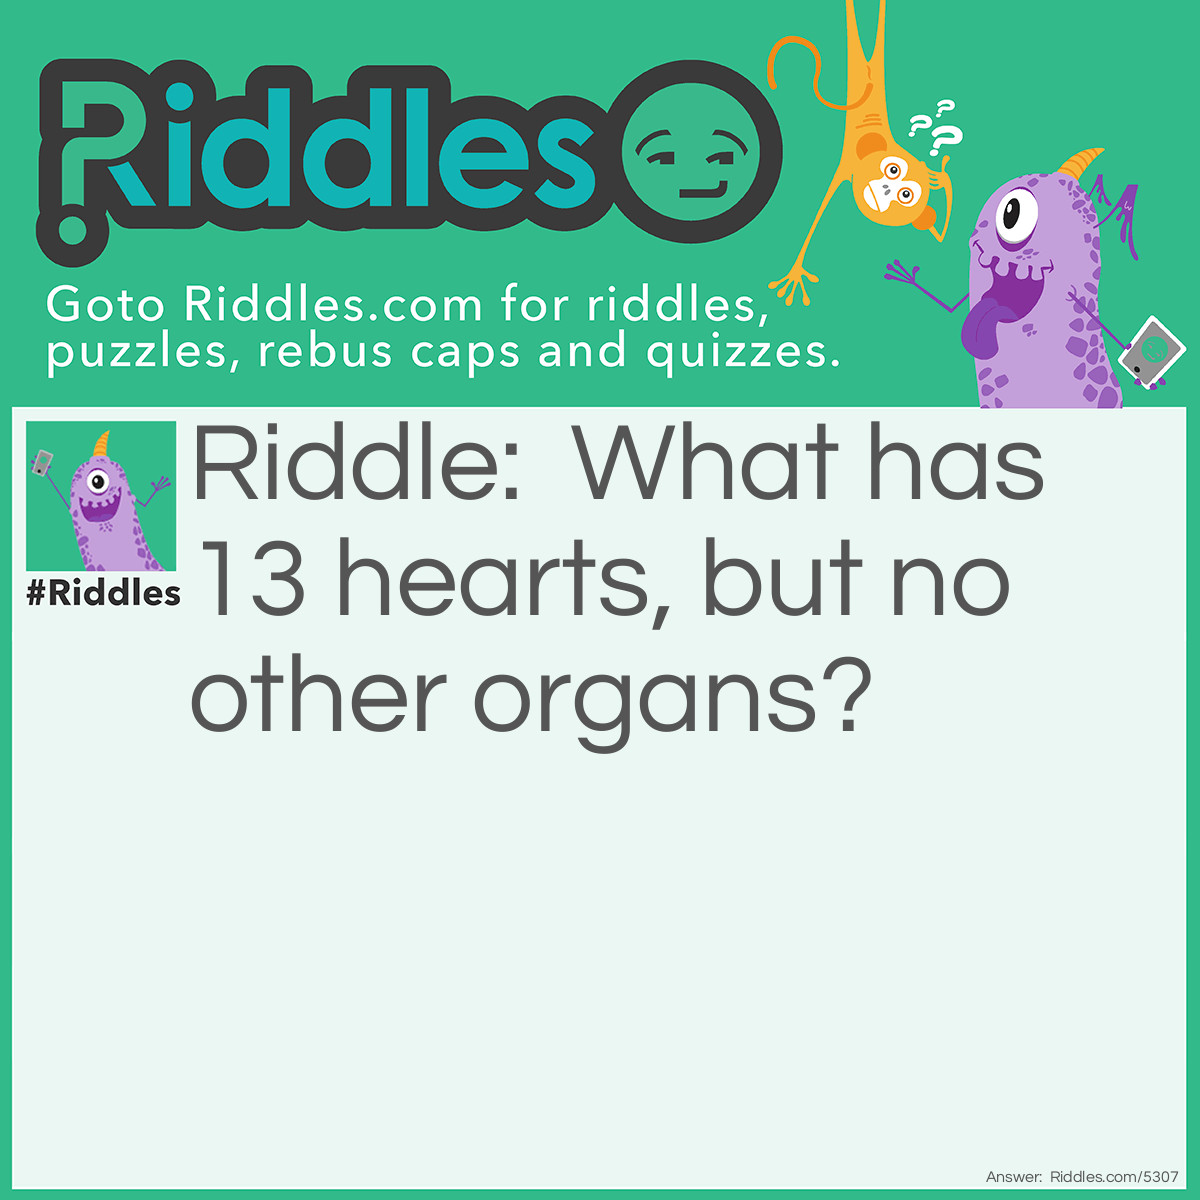 Riddle: What has 13 hearts, but no other organs? Answer: A deck of cards.